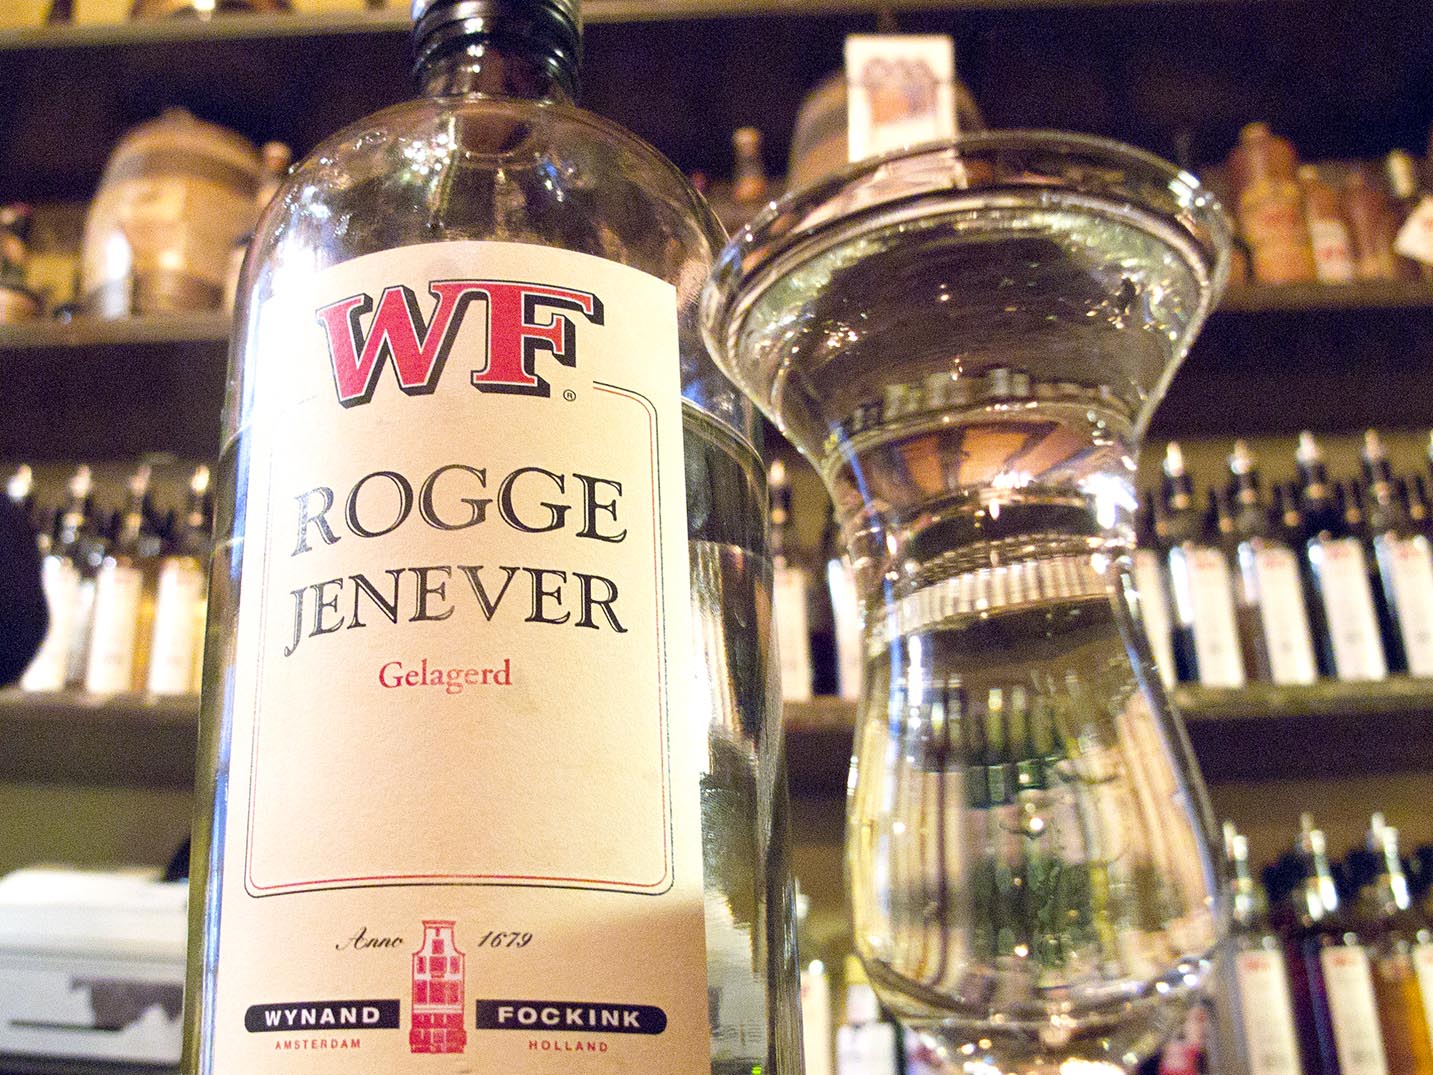 A bottle and glass of local jenever from Proeflokaal Wynand Fockink in Amsterdam.